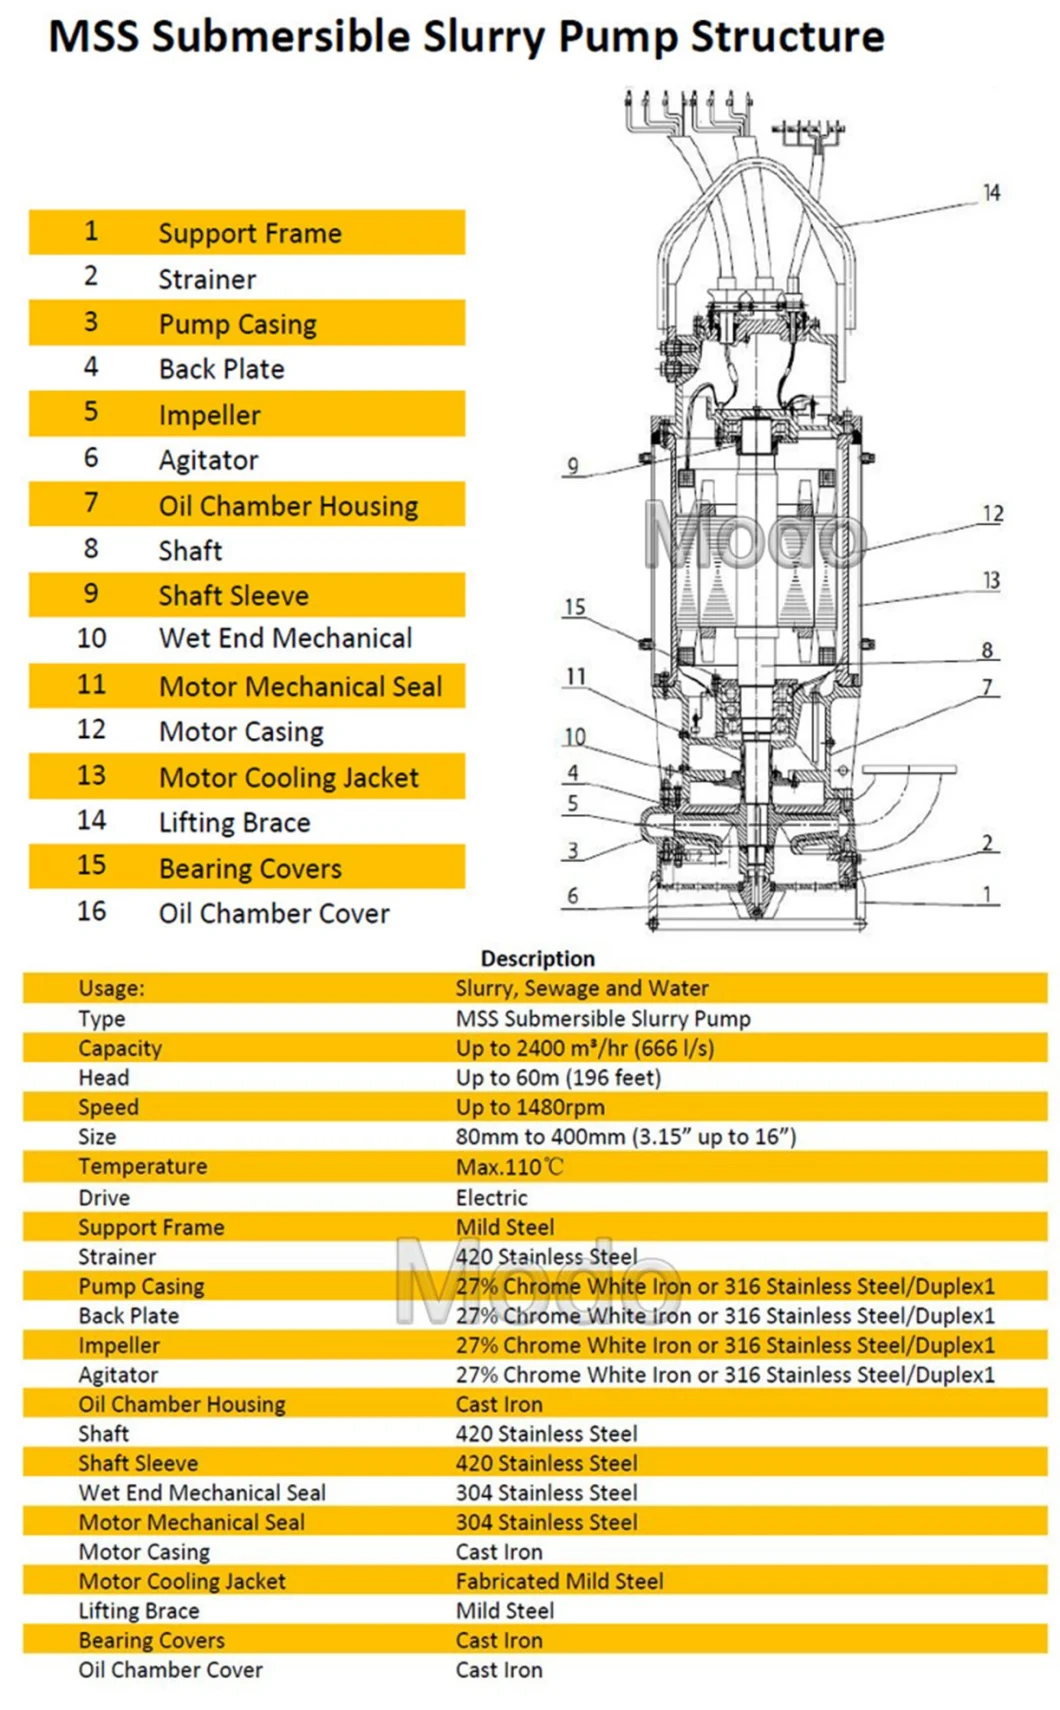 Newest Sump Agricultural Centrifugal Submersible Vertical Shaft Driven Slurry Pump for Heavy Duty